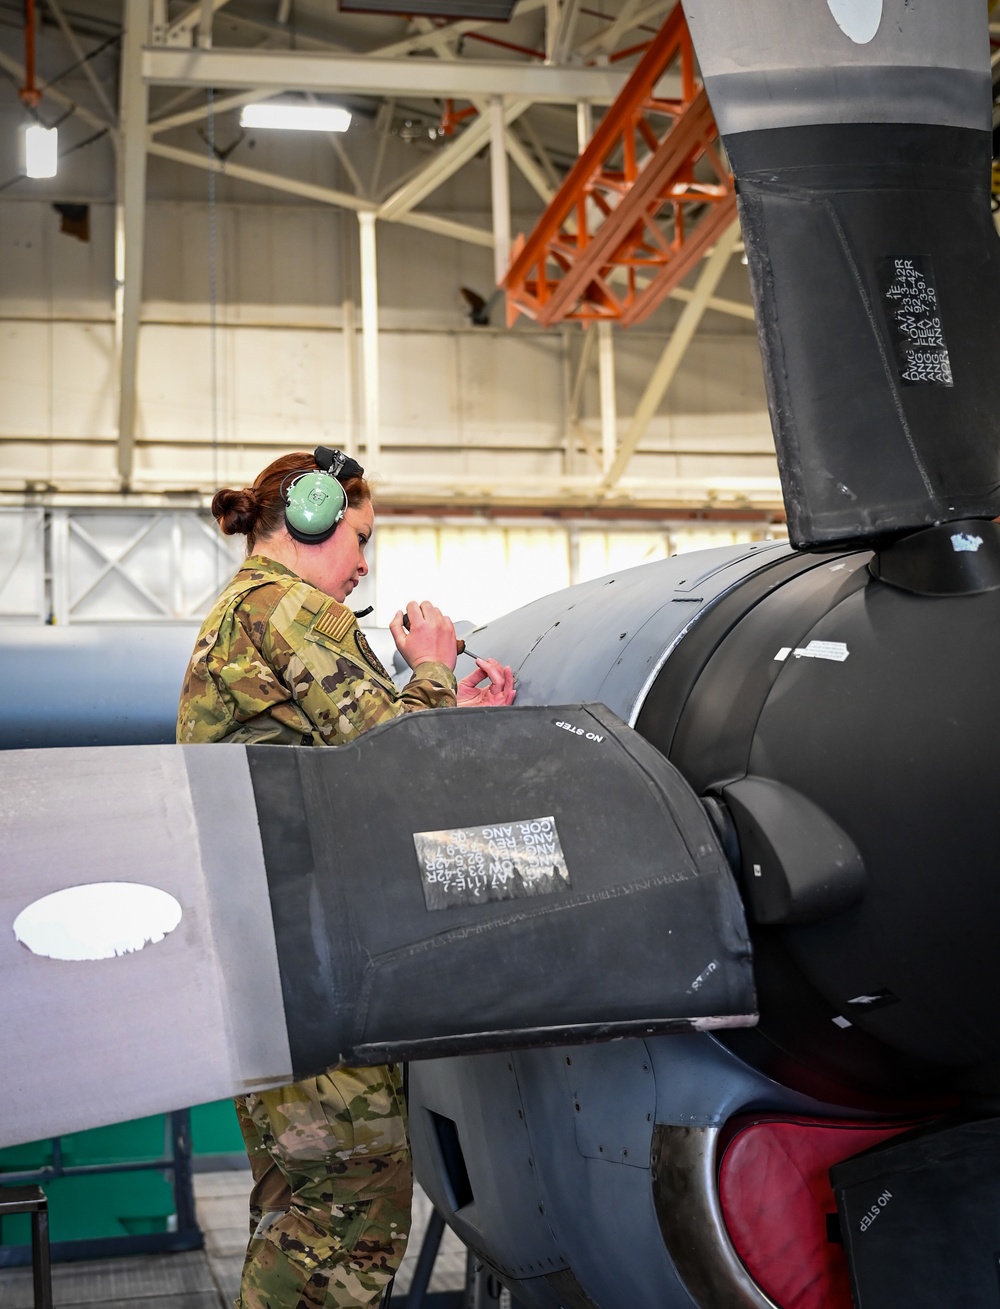 165AW conducts 15-day engine fluid check on C-130H